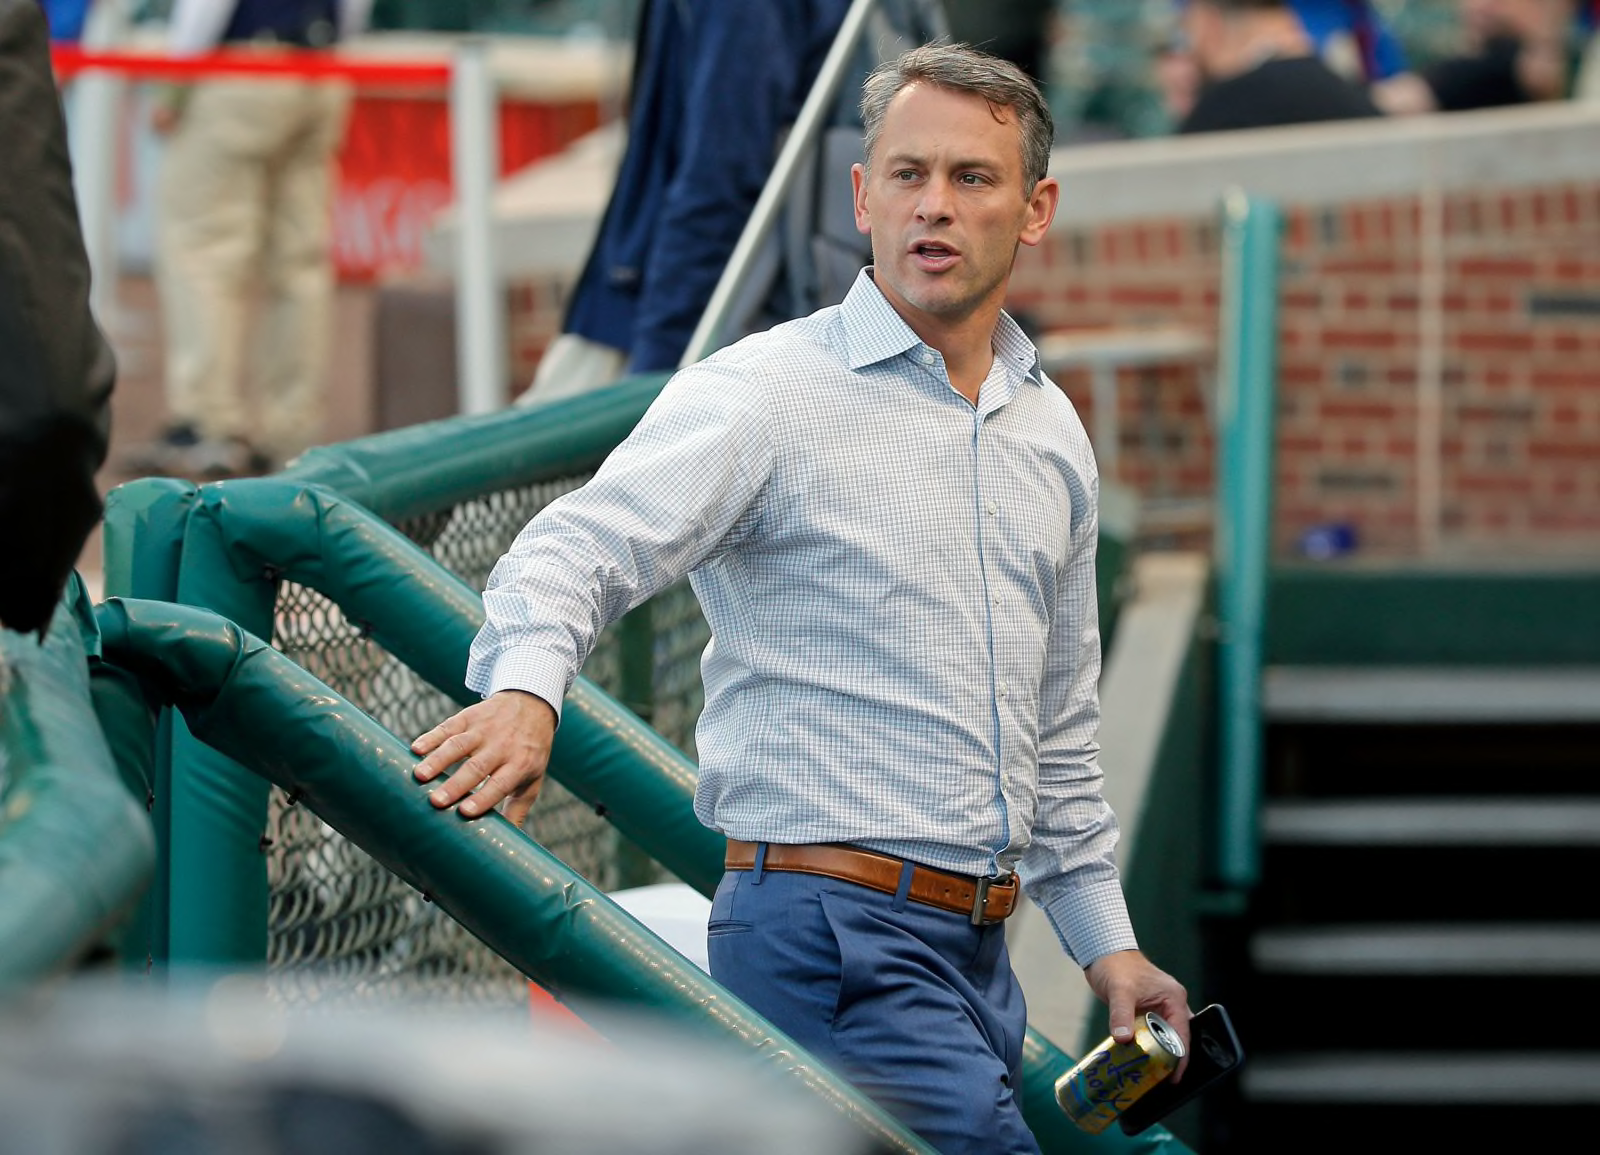 Jed Hoyer, Chicago Cubs